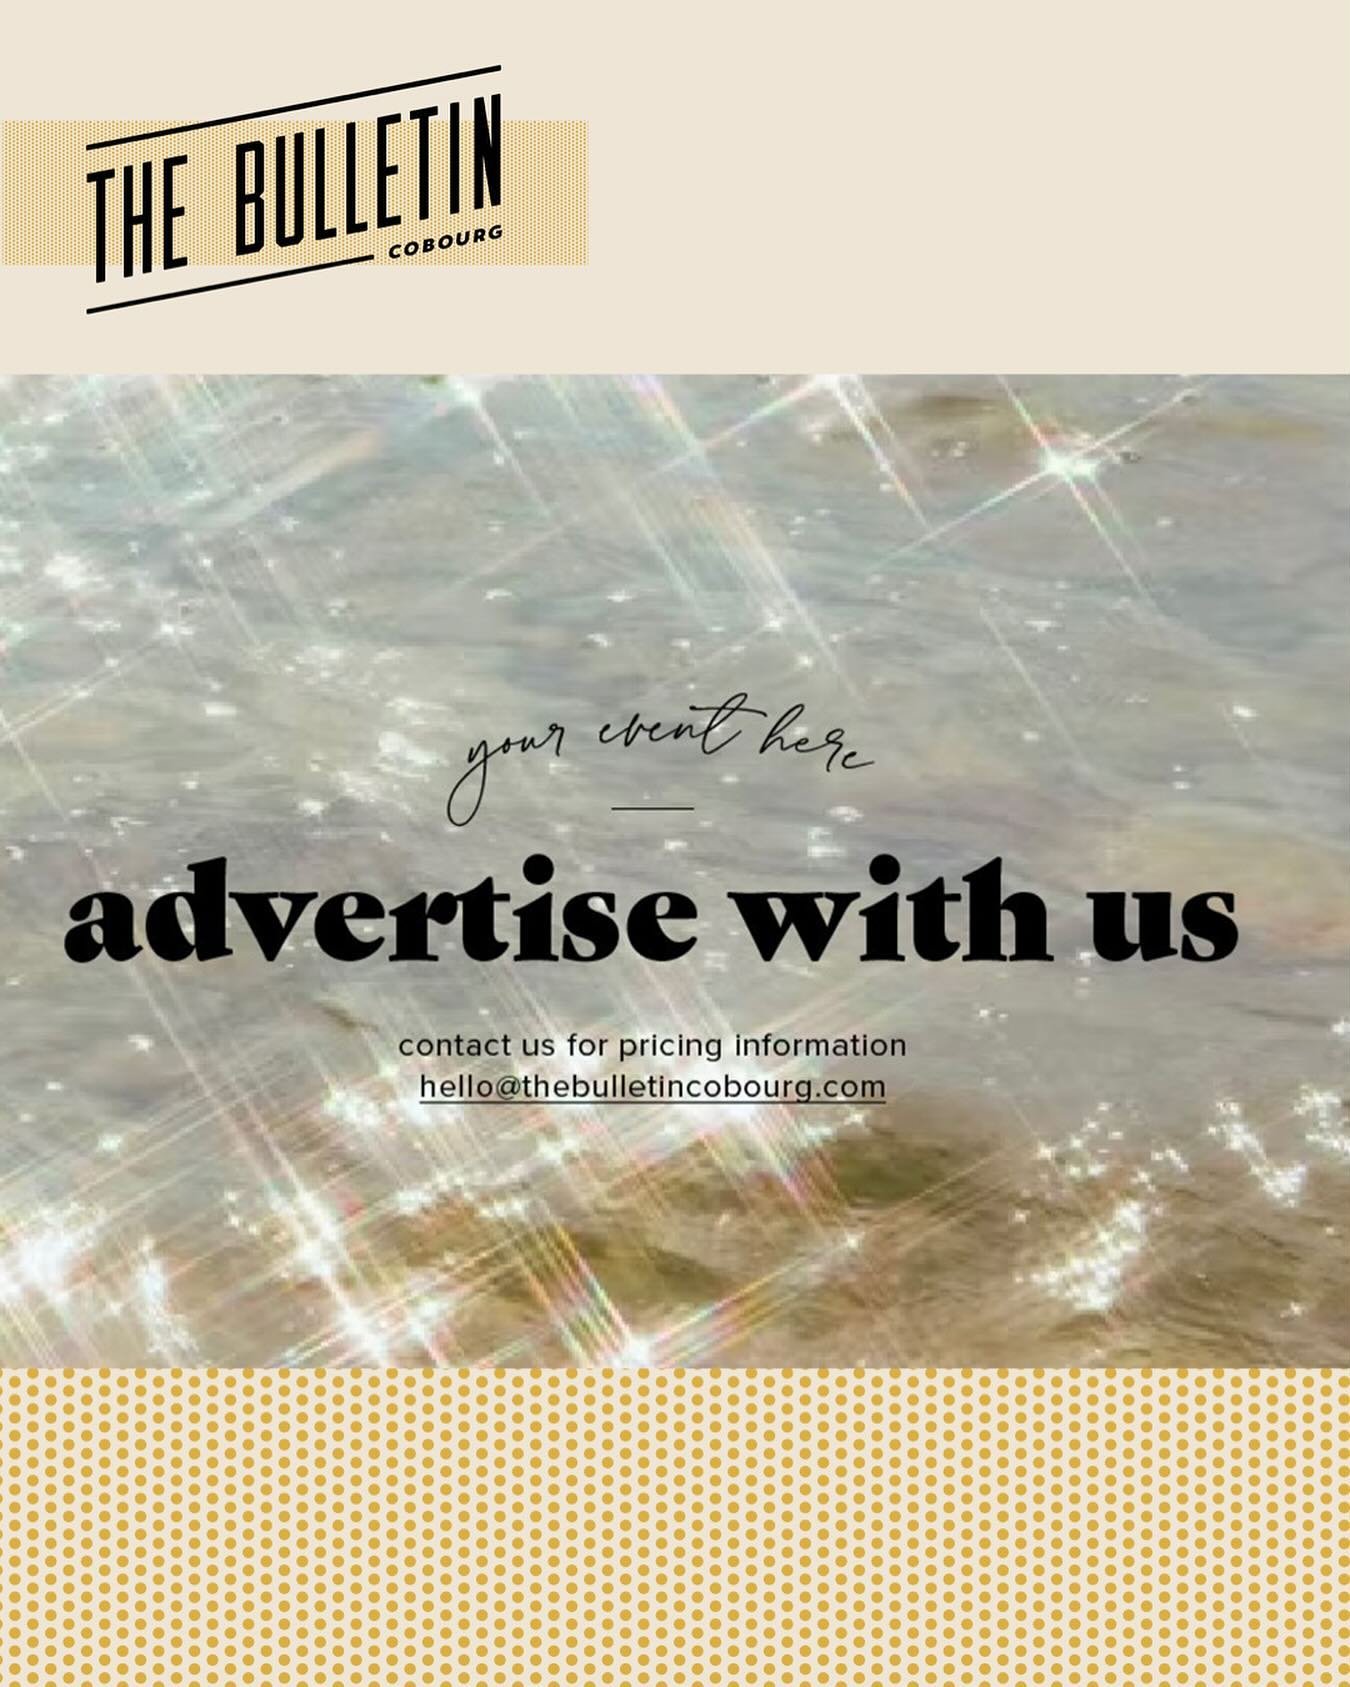 🌟 Exciting News from The Bulletin Cobourg! 🌟

Not only do we shine a spotlight on amazing local businesses, but we're also here to promote your next big event! 🎉 Whether you're launching a product, hosting a gala, or planning a community gathering